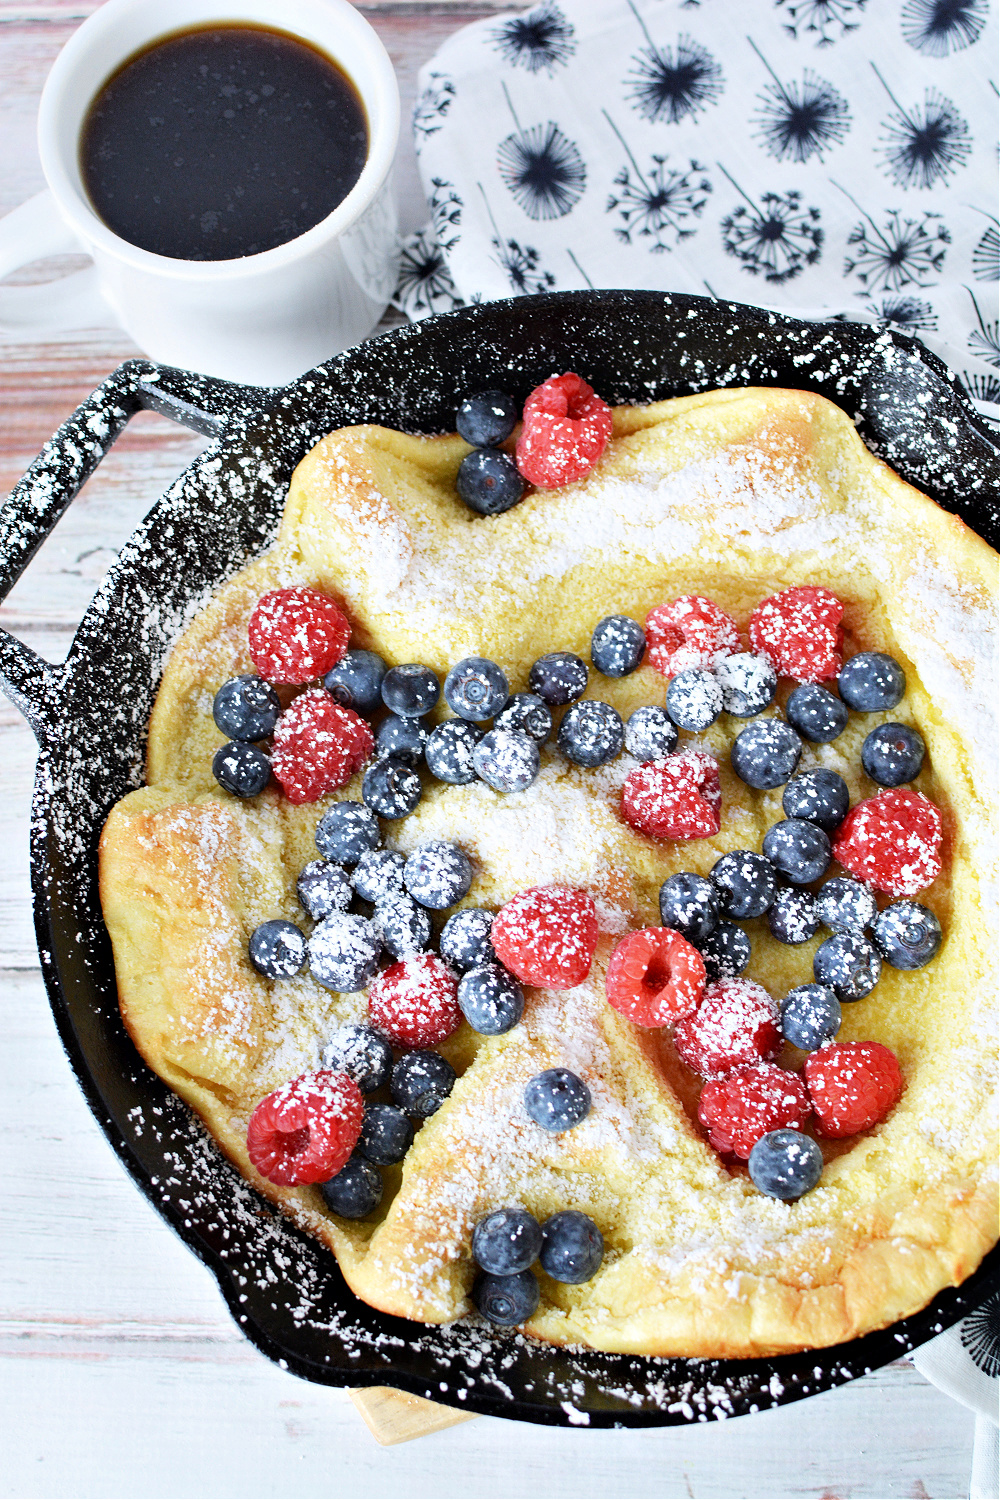 Puffed Pancake filled with raspberries, blueberries and sprinkles of powdered sugar